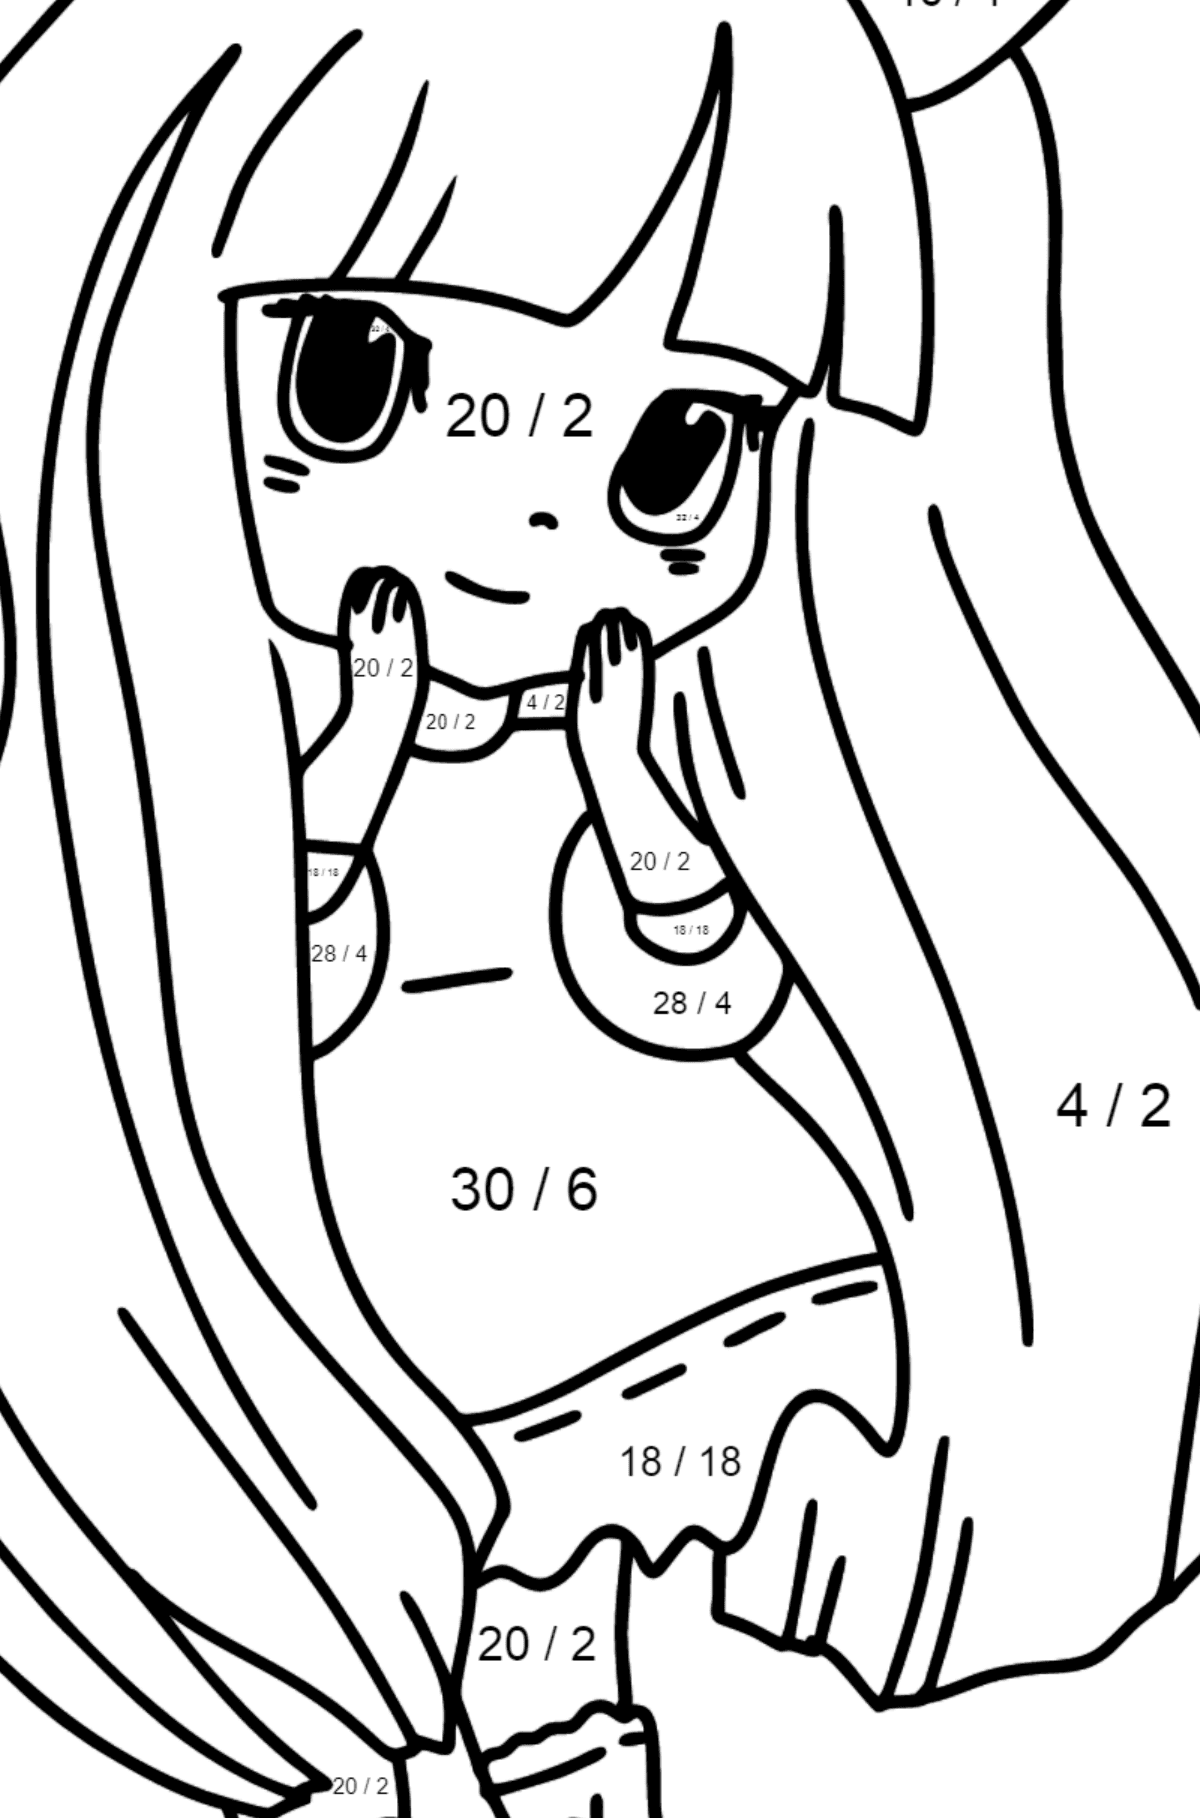 Anime Bunny Girl Coloring Pages - Math Coloring - Division for Kids